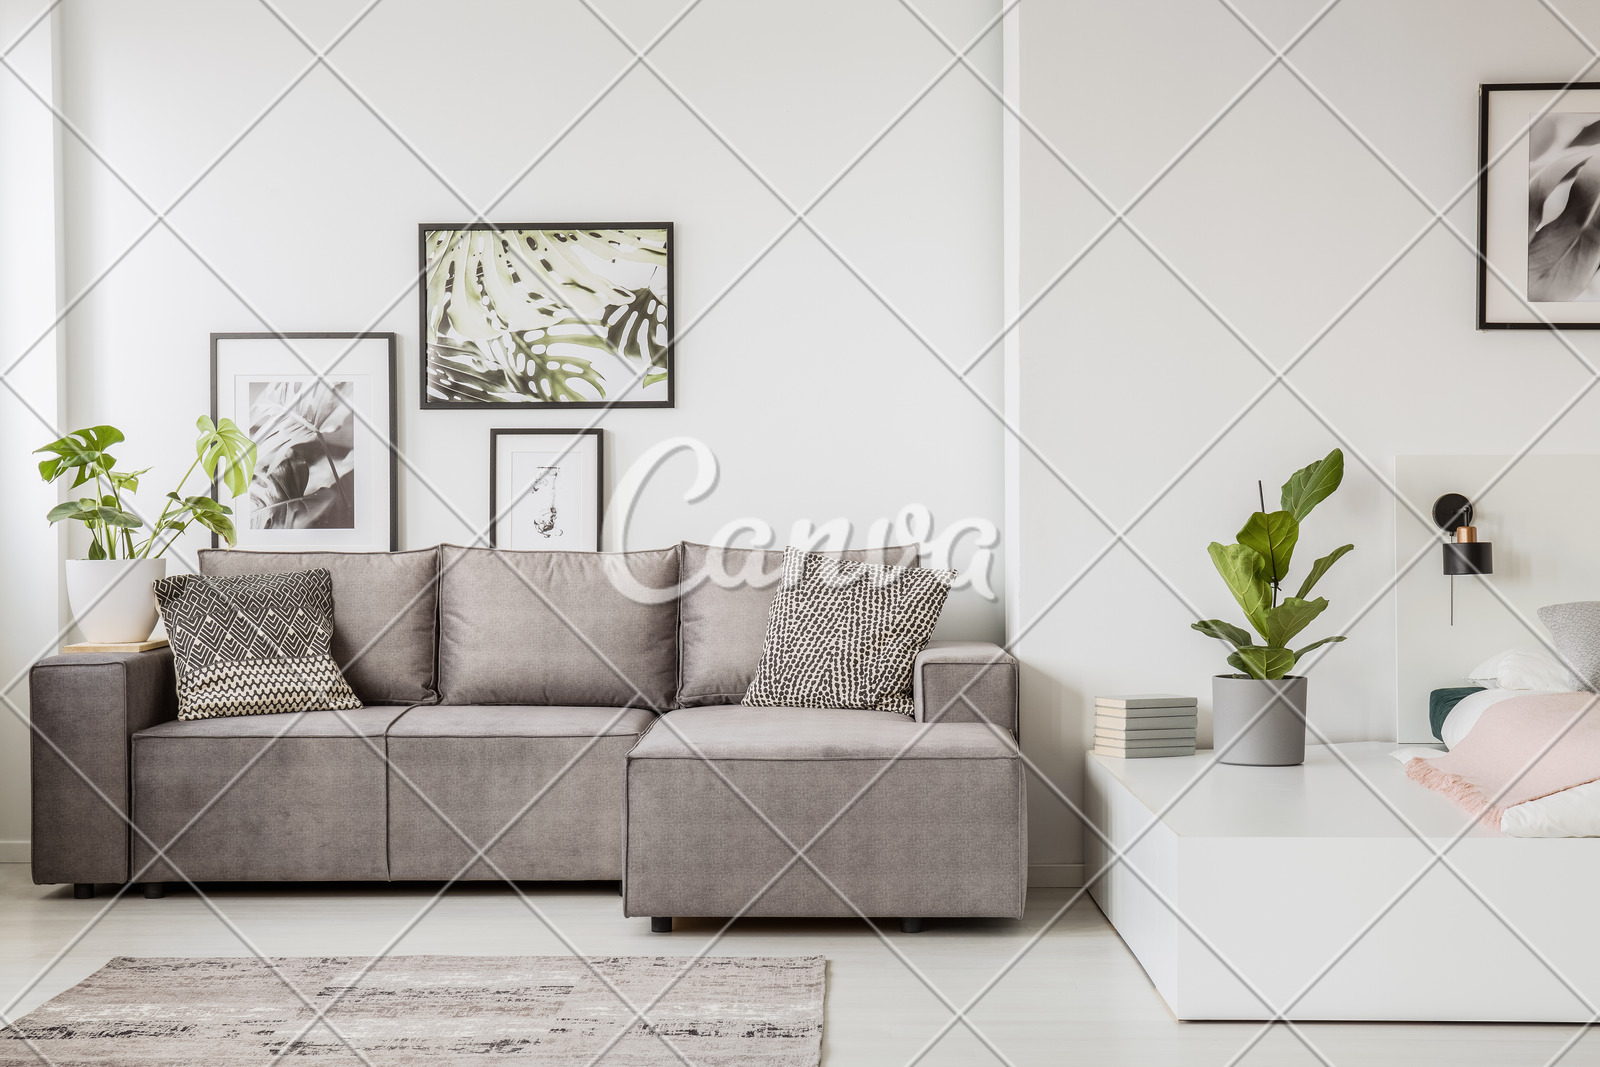 Patterned Pillow On Grey Corner Sofa In Living Room Interior